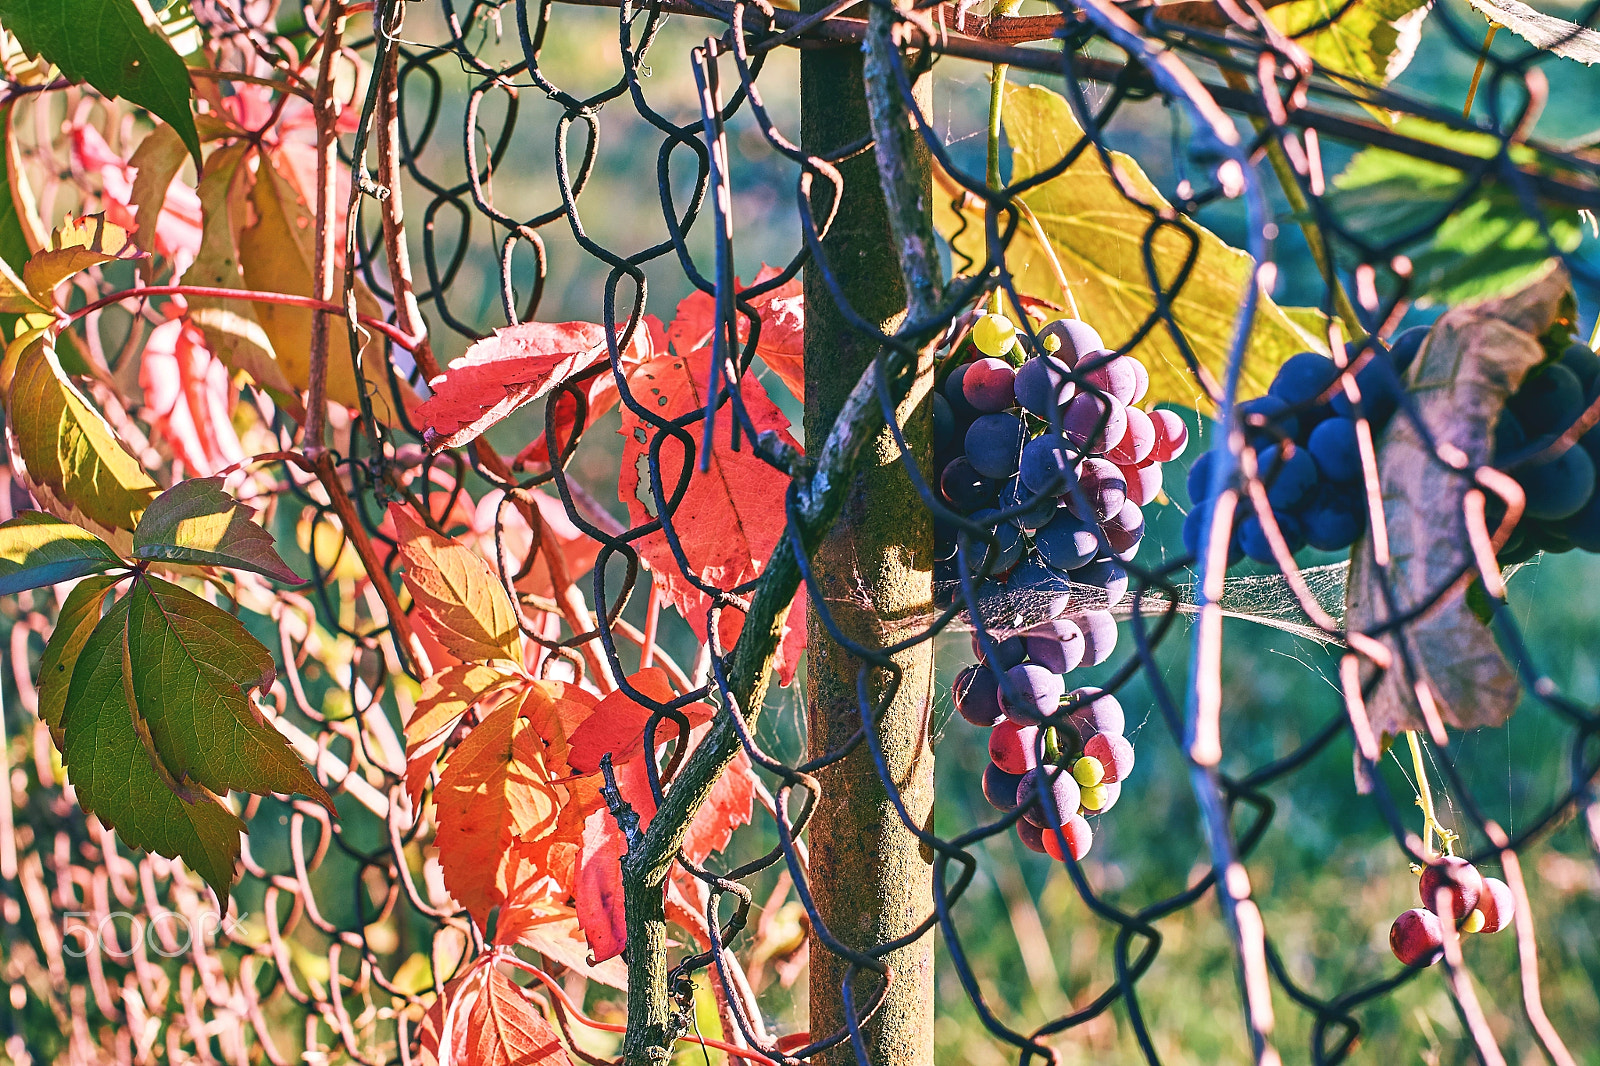 Sony SLT-A57 sample photo. Grapes on old vineyard's fence in autumn photography